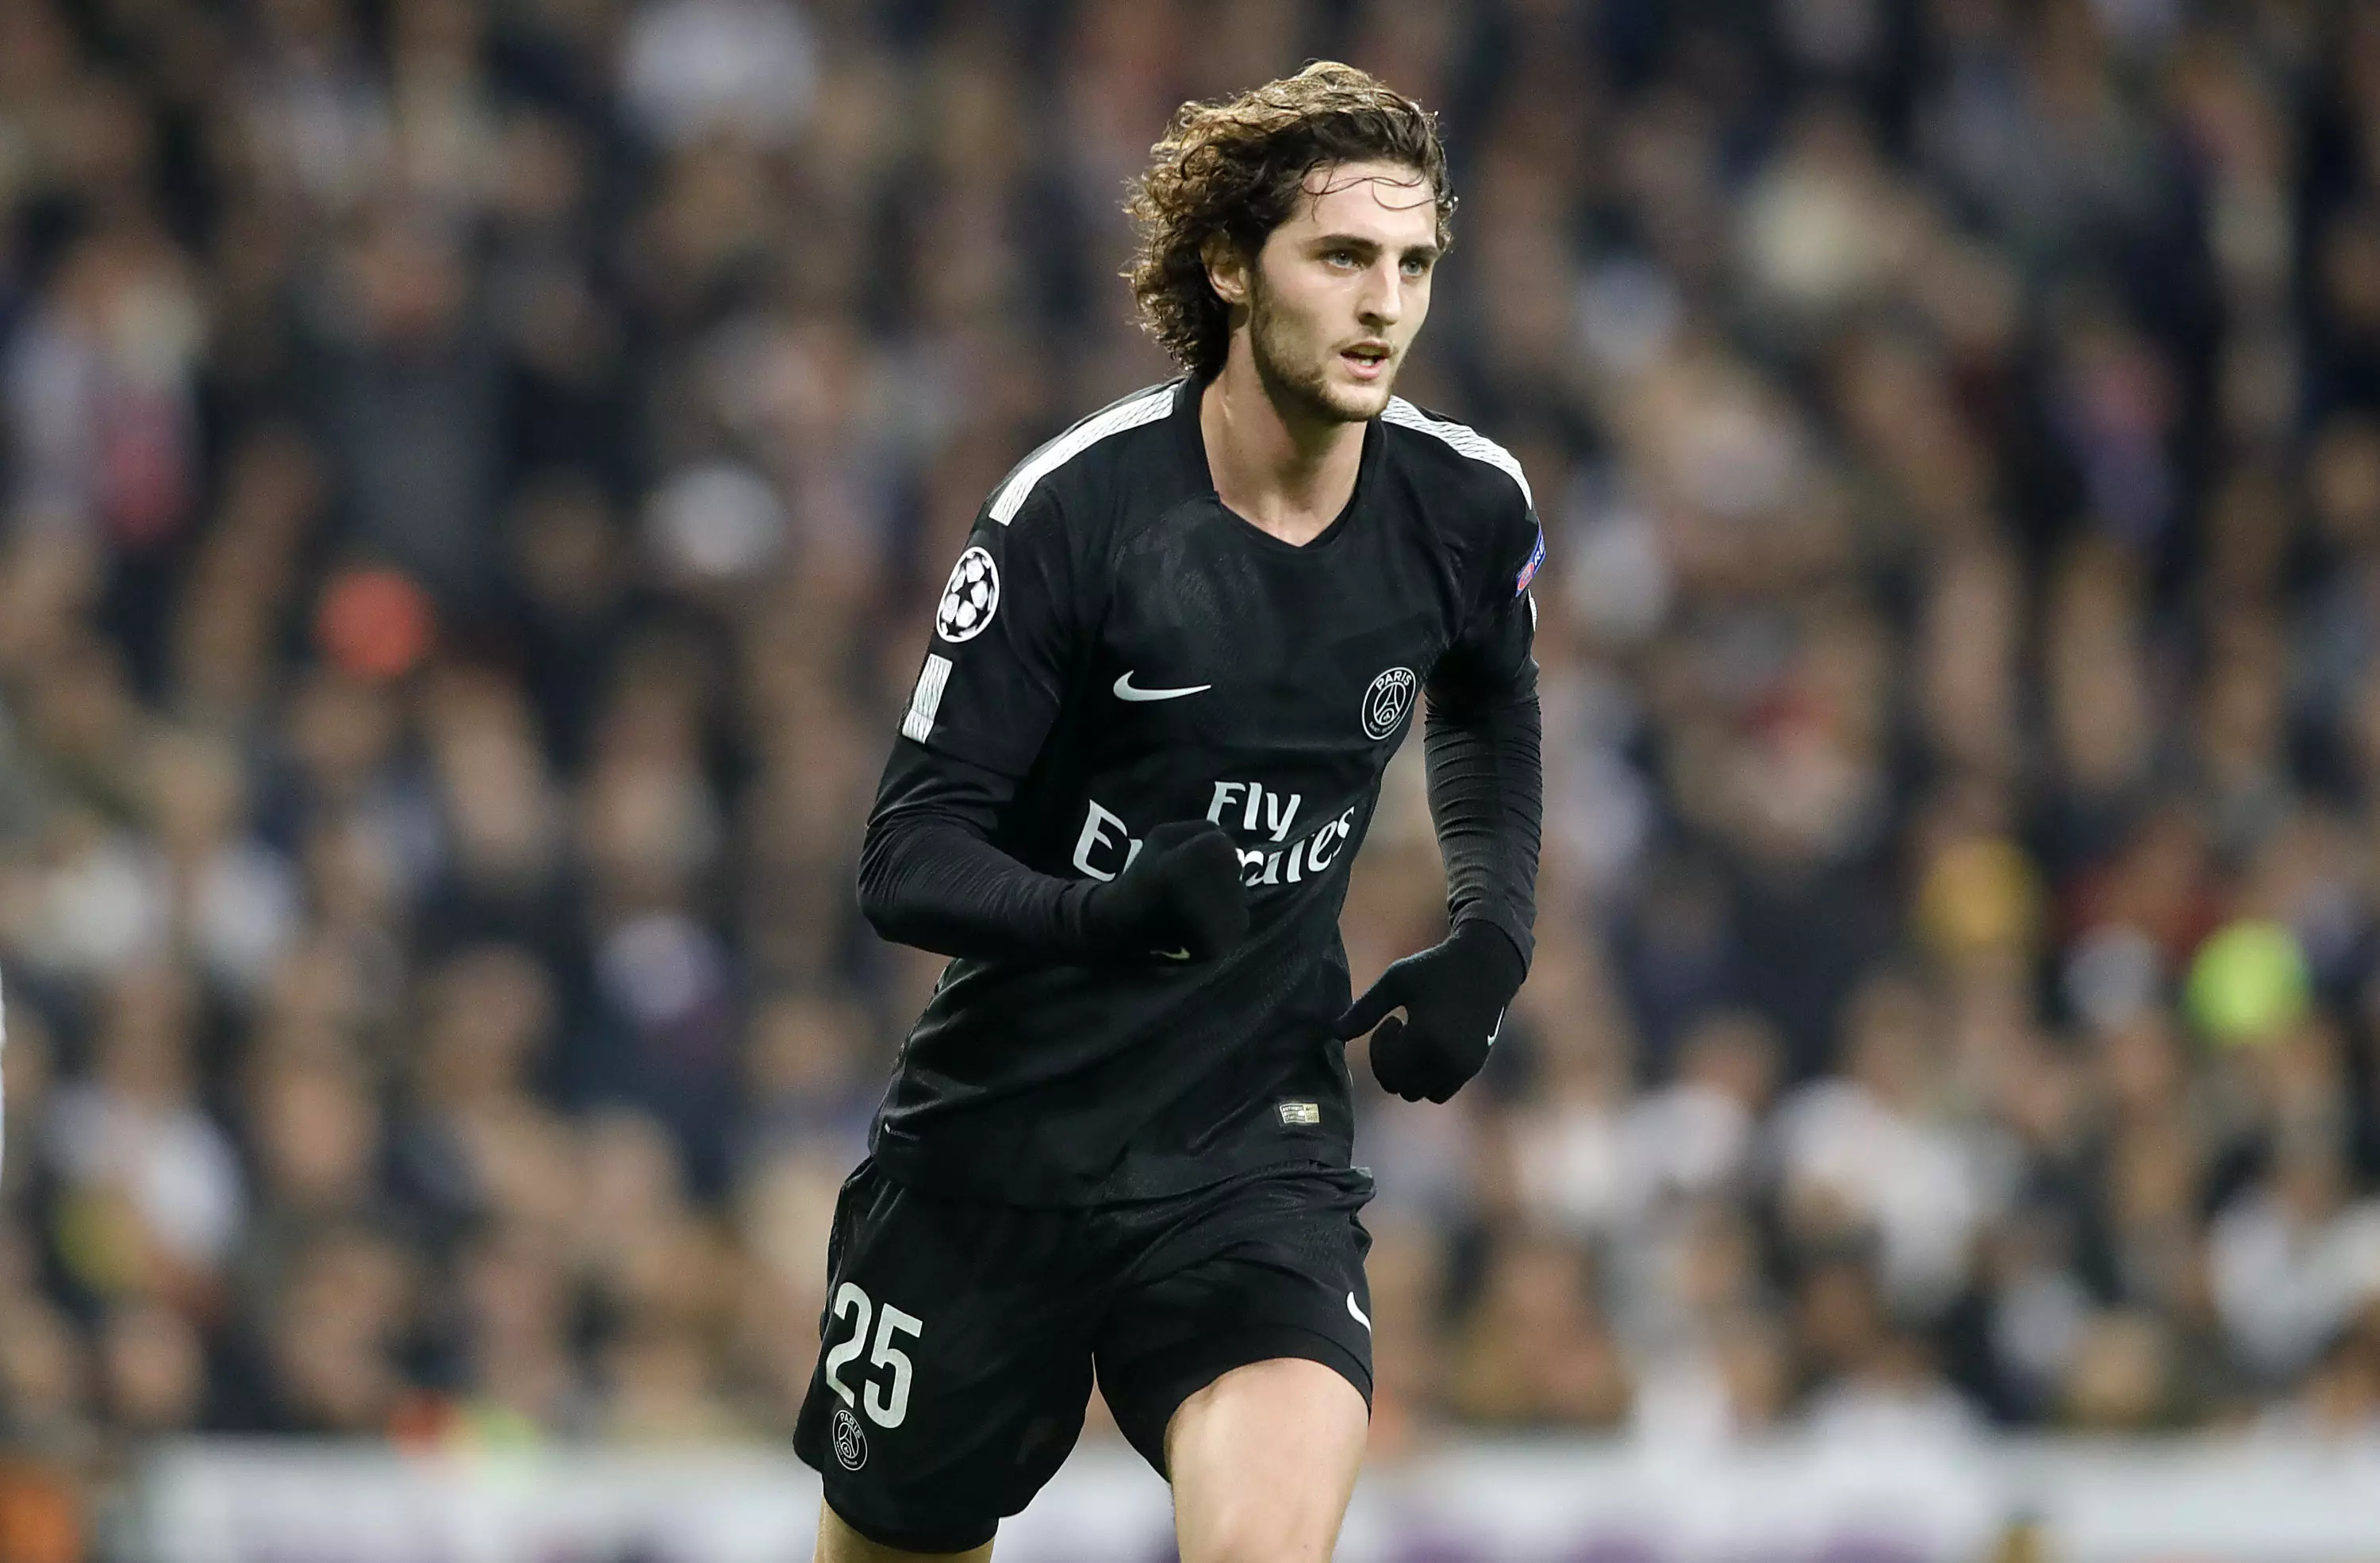 PSG's midfielder Rabiot has also been linked with a move to Barcelona. Image: PA Images